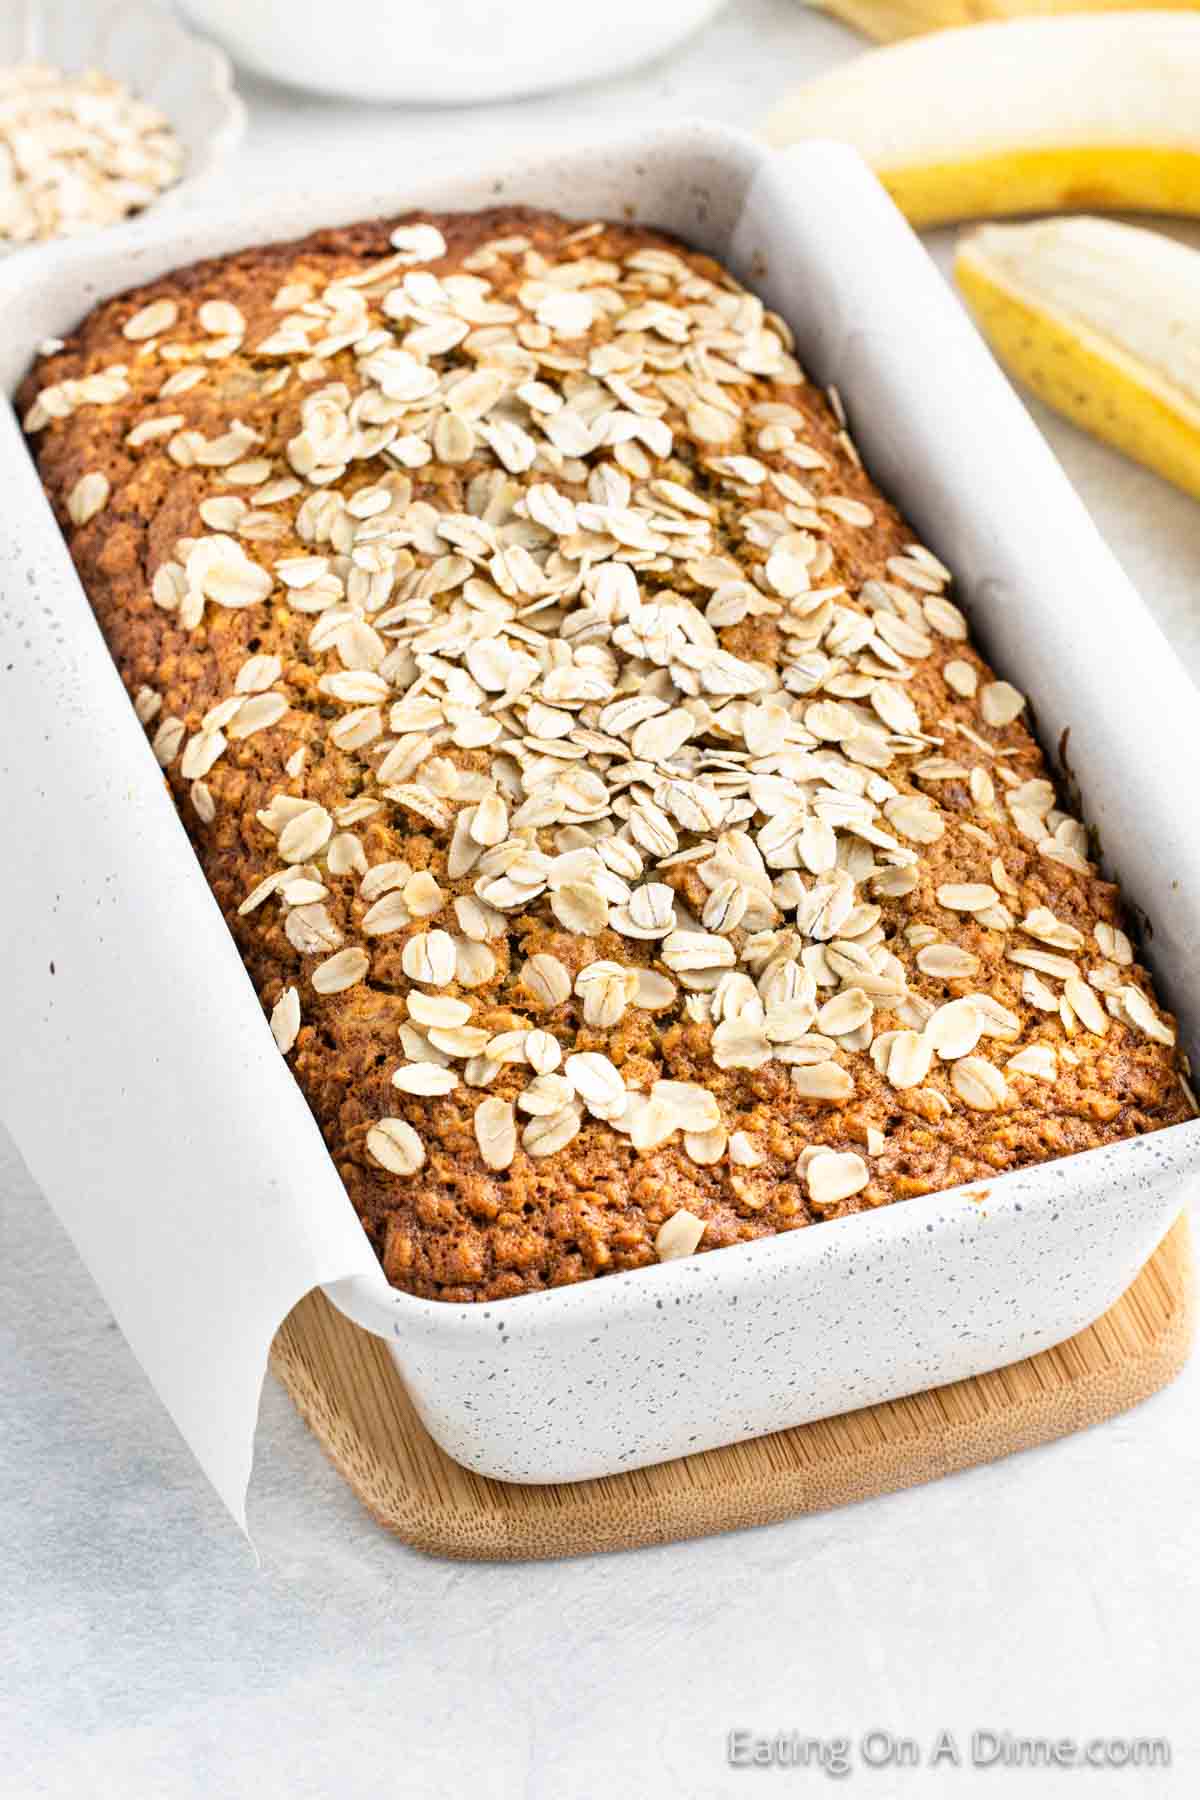 Baked Oatmeal Banana Bread in a loaf pan